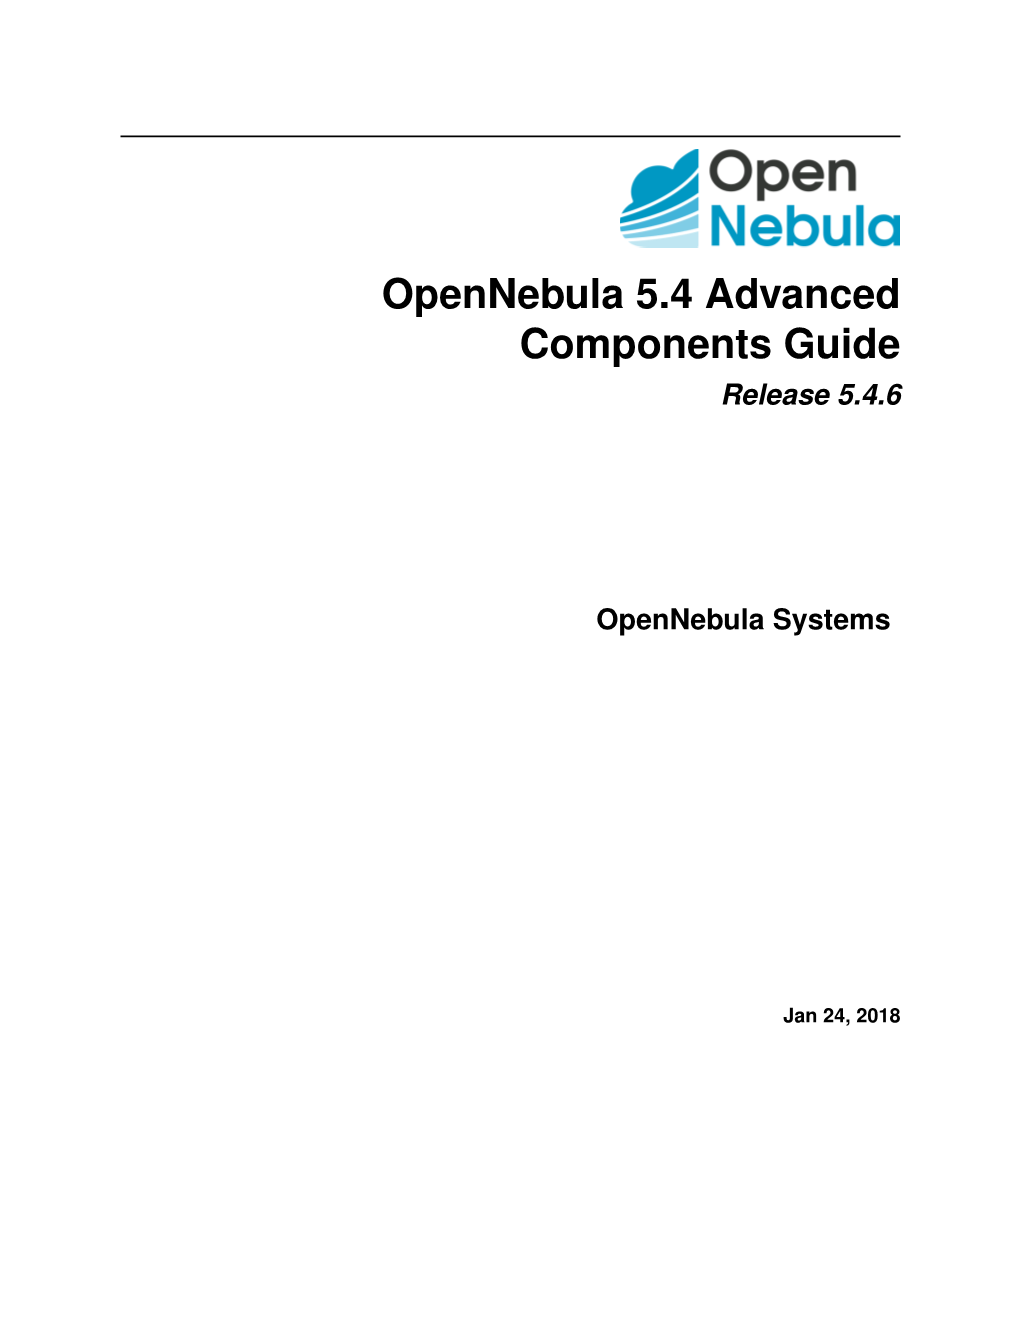 Opennebula 5.4 Advanced Components Guide Release 5.4.6